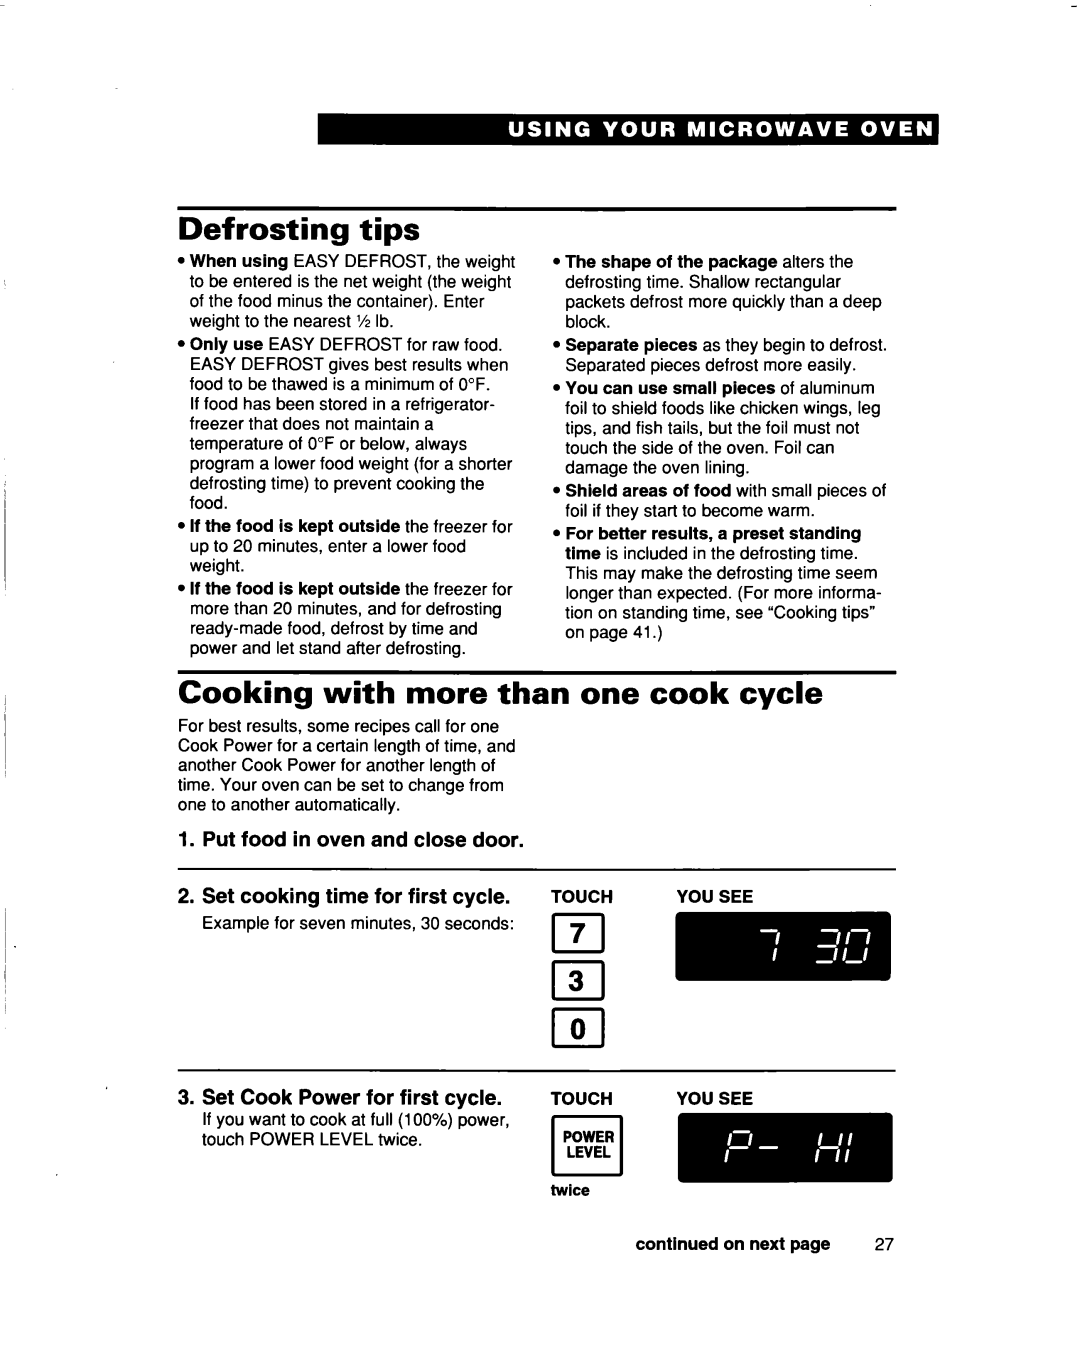 Whirlpool MT5120XAQ Defrosting tips, Cooking with more than one cook cycle, Put food in oven and close door, Set, twice 